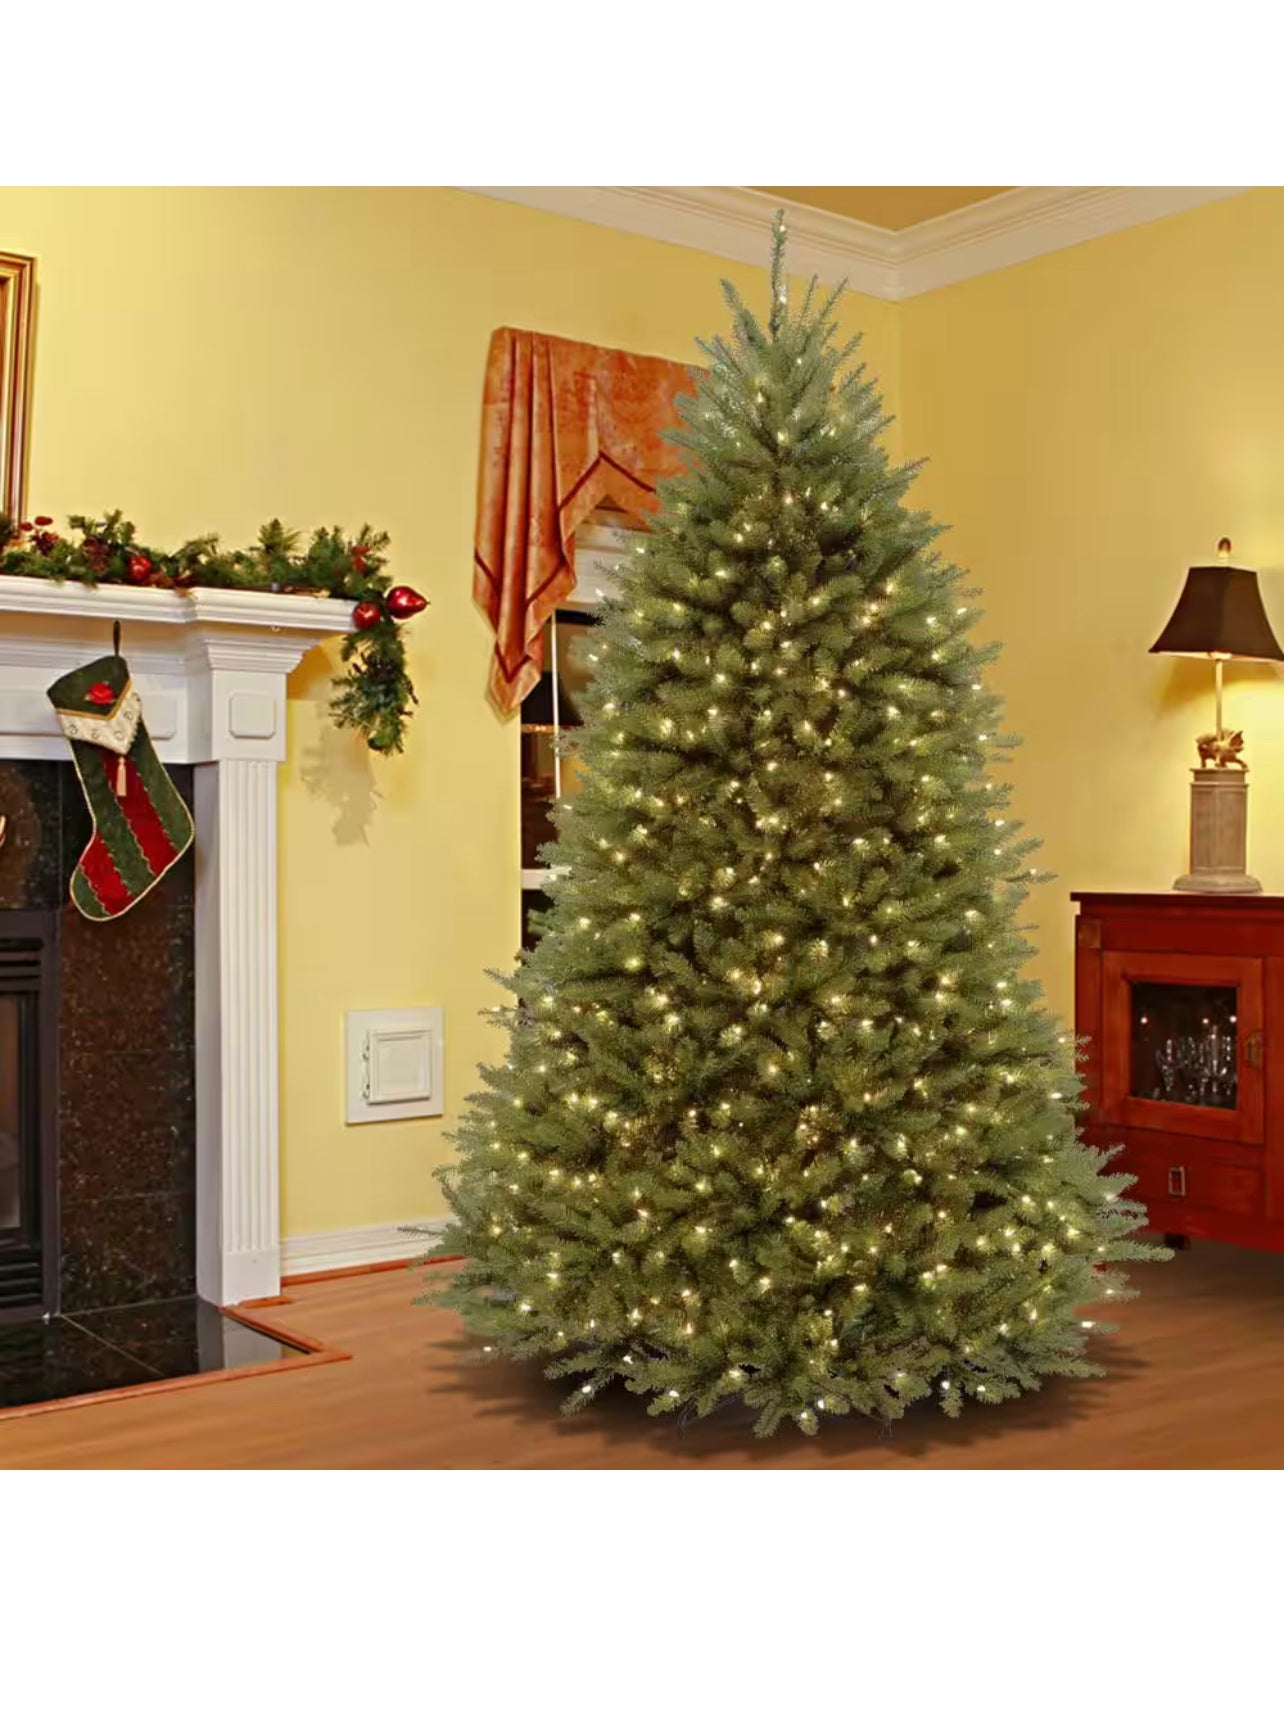 9 ft. Pre-Lit Dunhill Fir Hinged Artificial Christmas Tree with Clear Lights